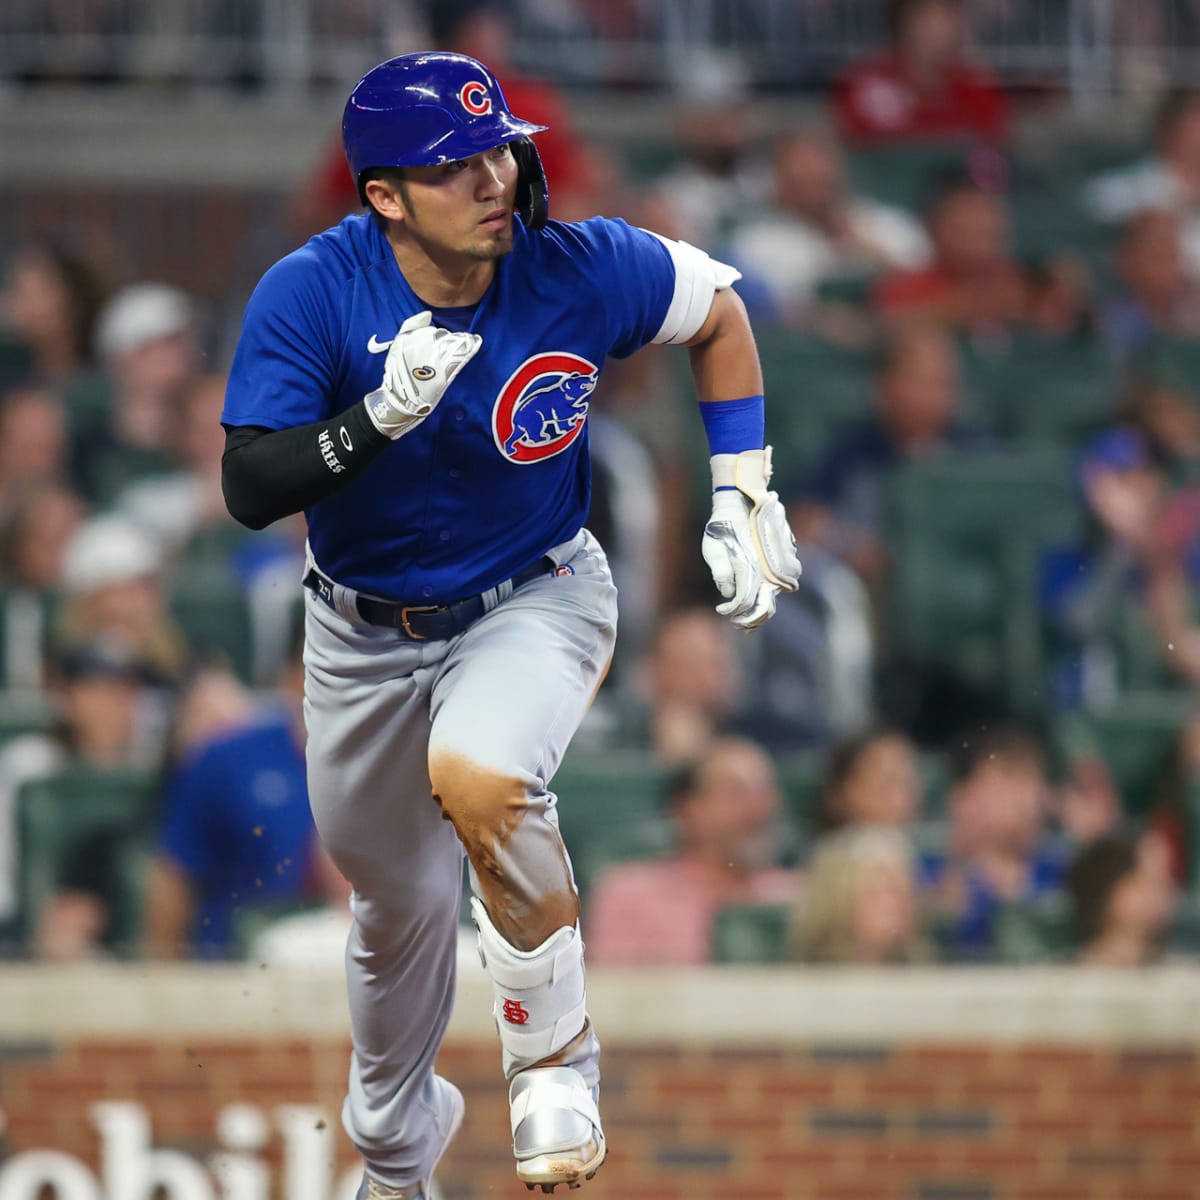 Cubs, Japanese outfielder Seiya Suzuki agree to five-year deal - Sports  Illustrated